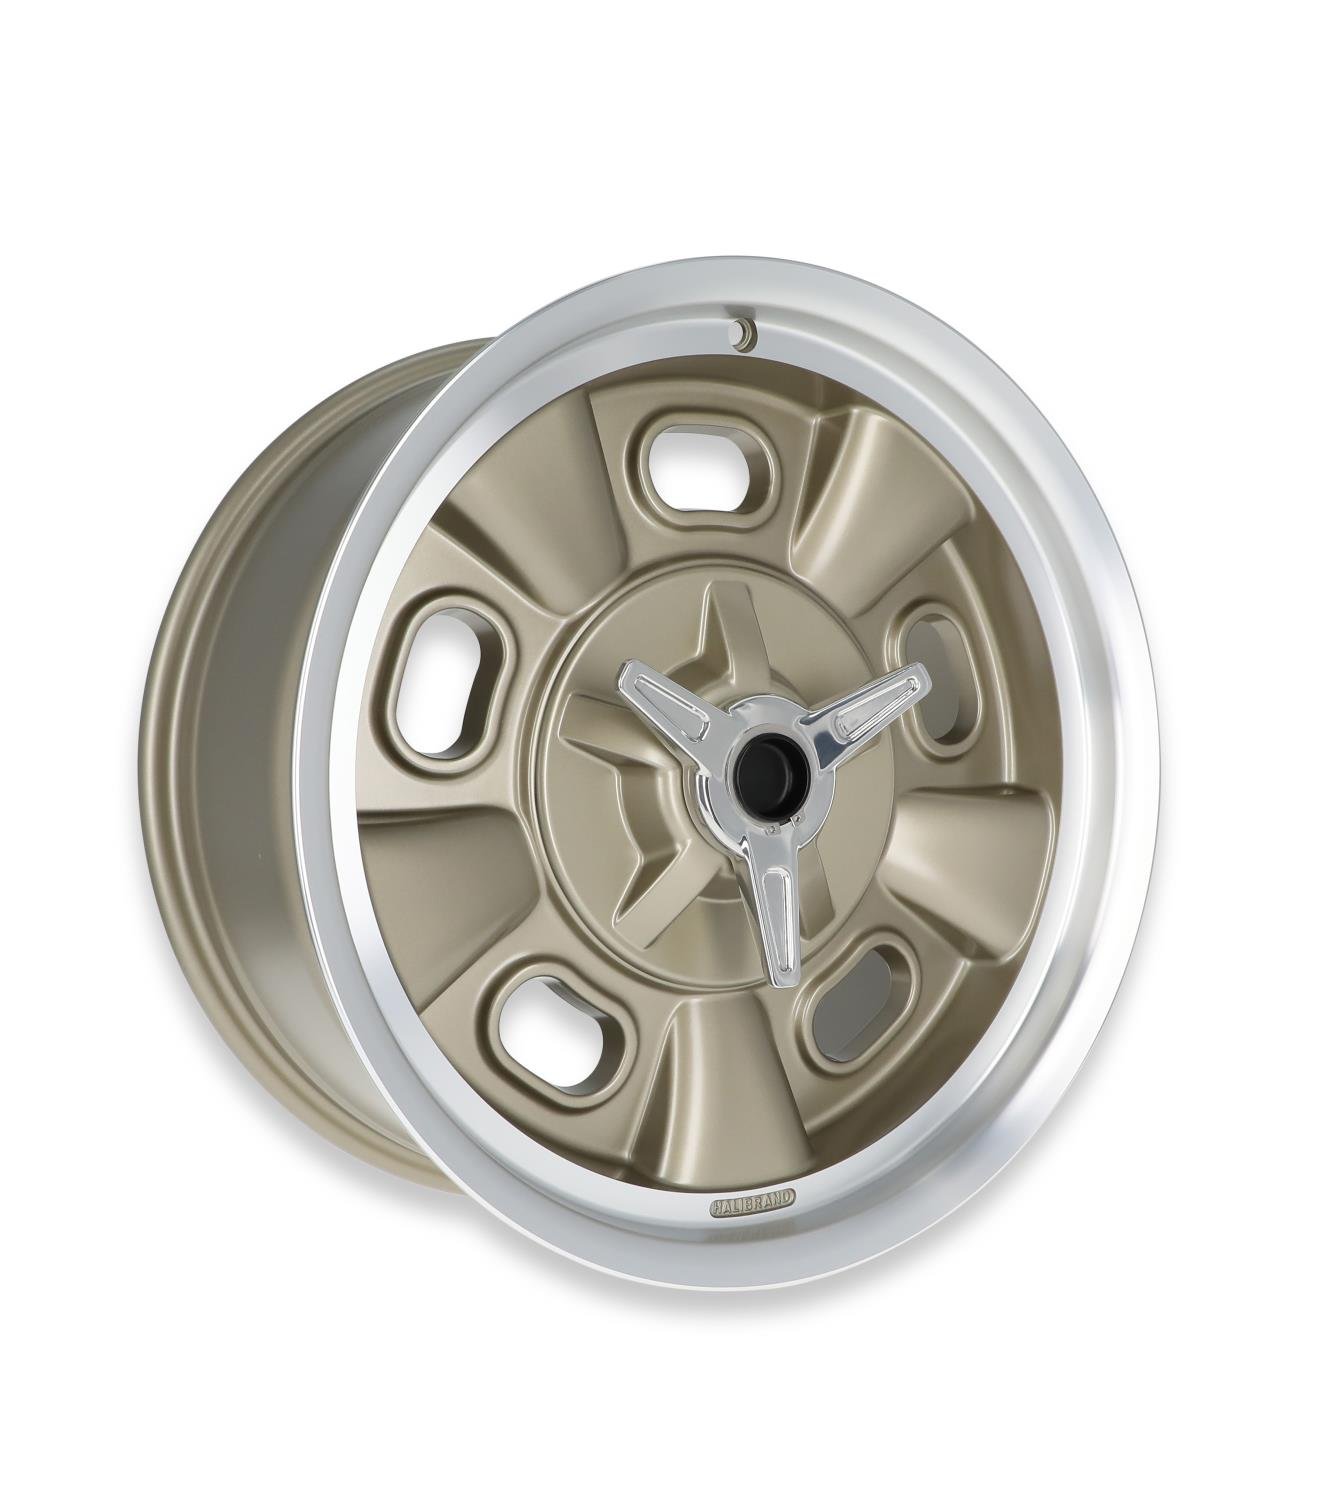 Indy Roadster Wheel, Size: 19x8.5", Bolt Pattern: 5x5", Backspace: 5.25" [MAG7 - Semi Gloss Clearcoat]